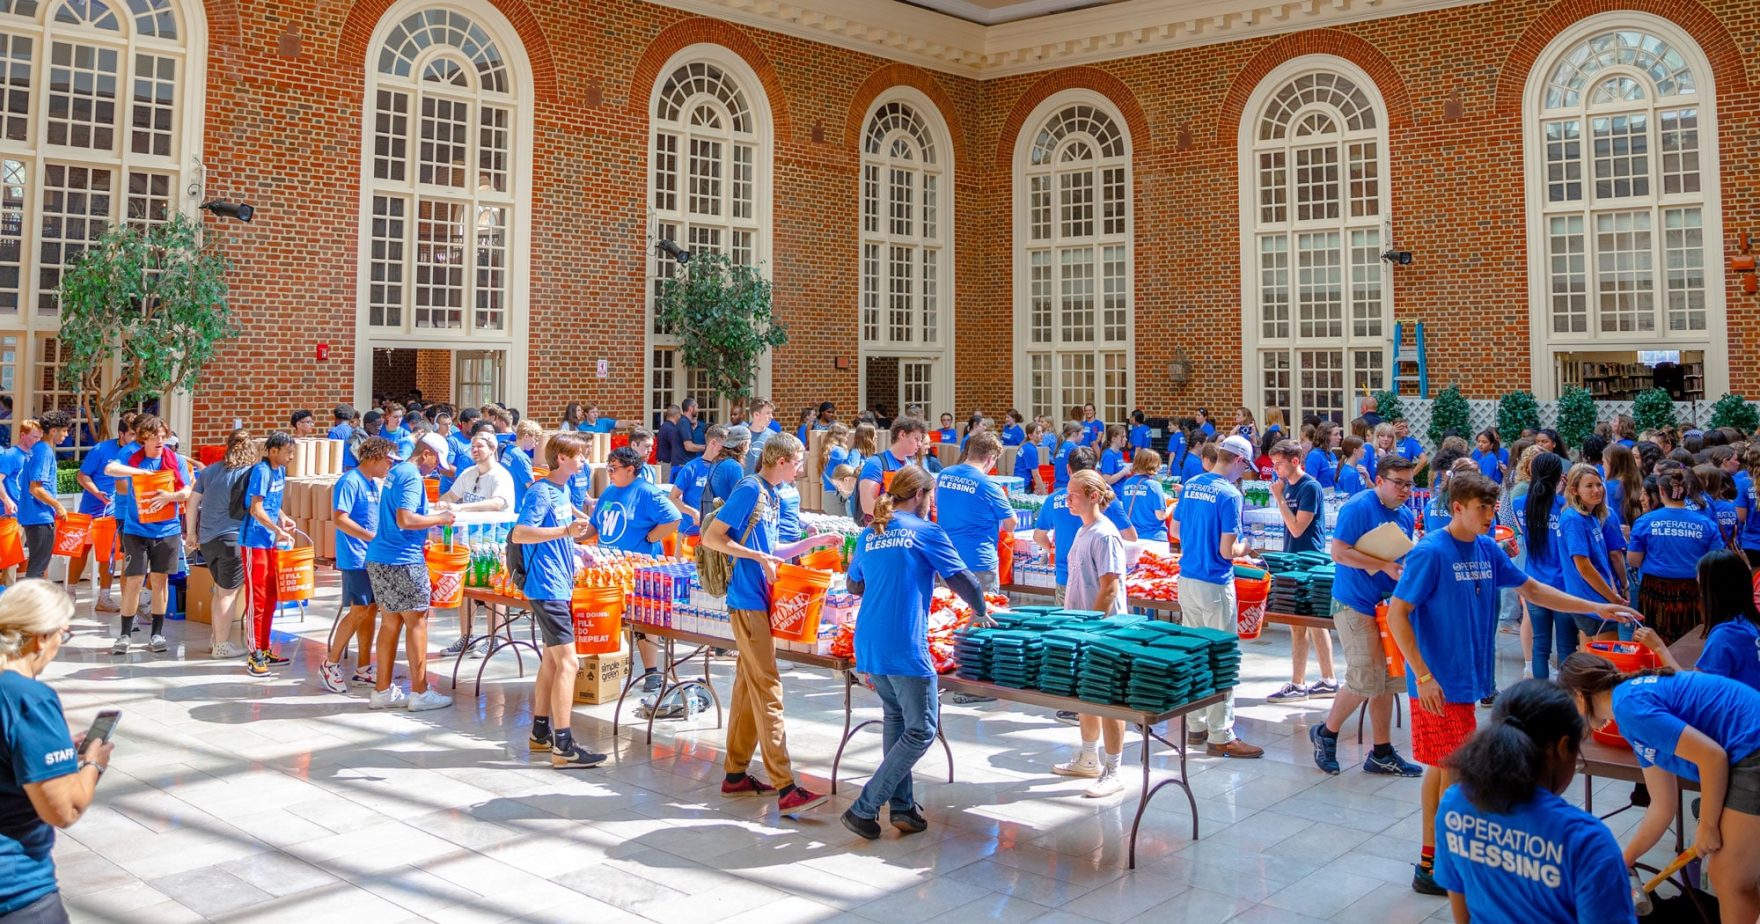 Students packing relief kits: Explore Regent's work with Operation Blessing